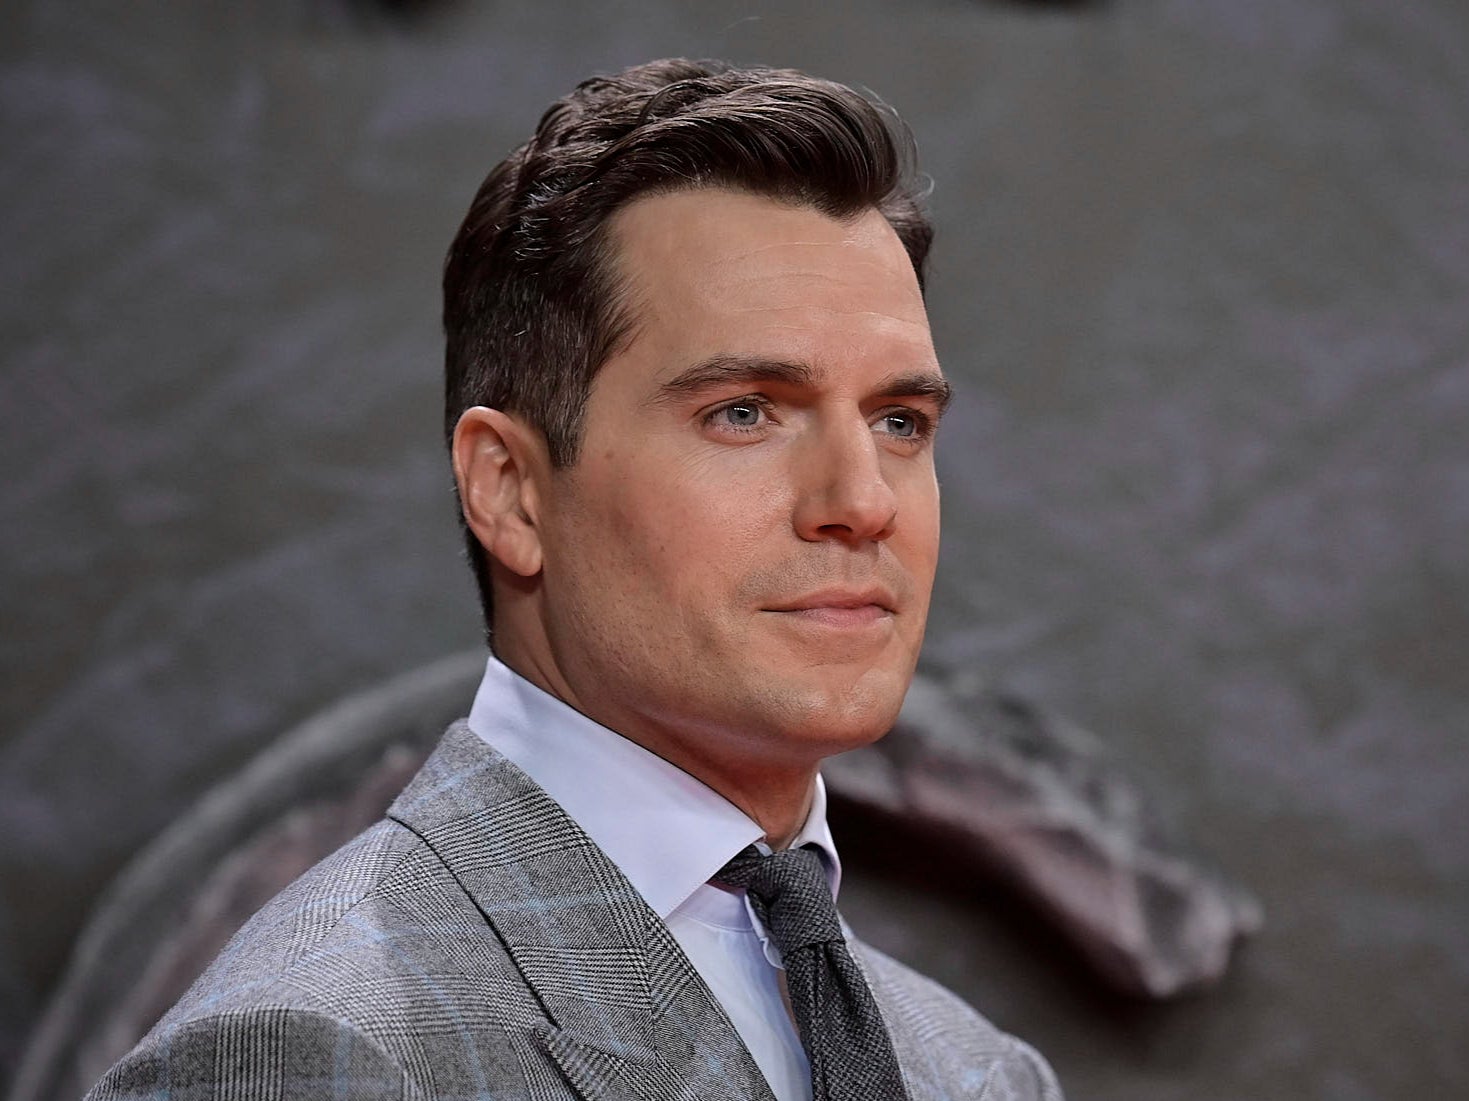 Henry Cavill Hairstyle: Channeling the Suave and Sophisticated Look! -  YouTube